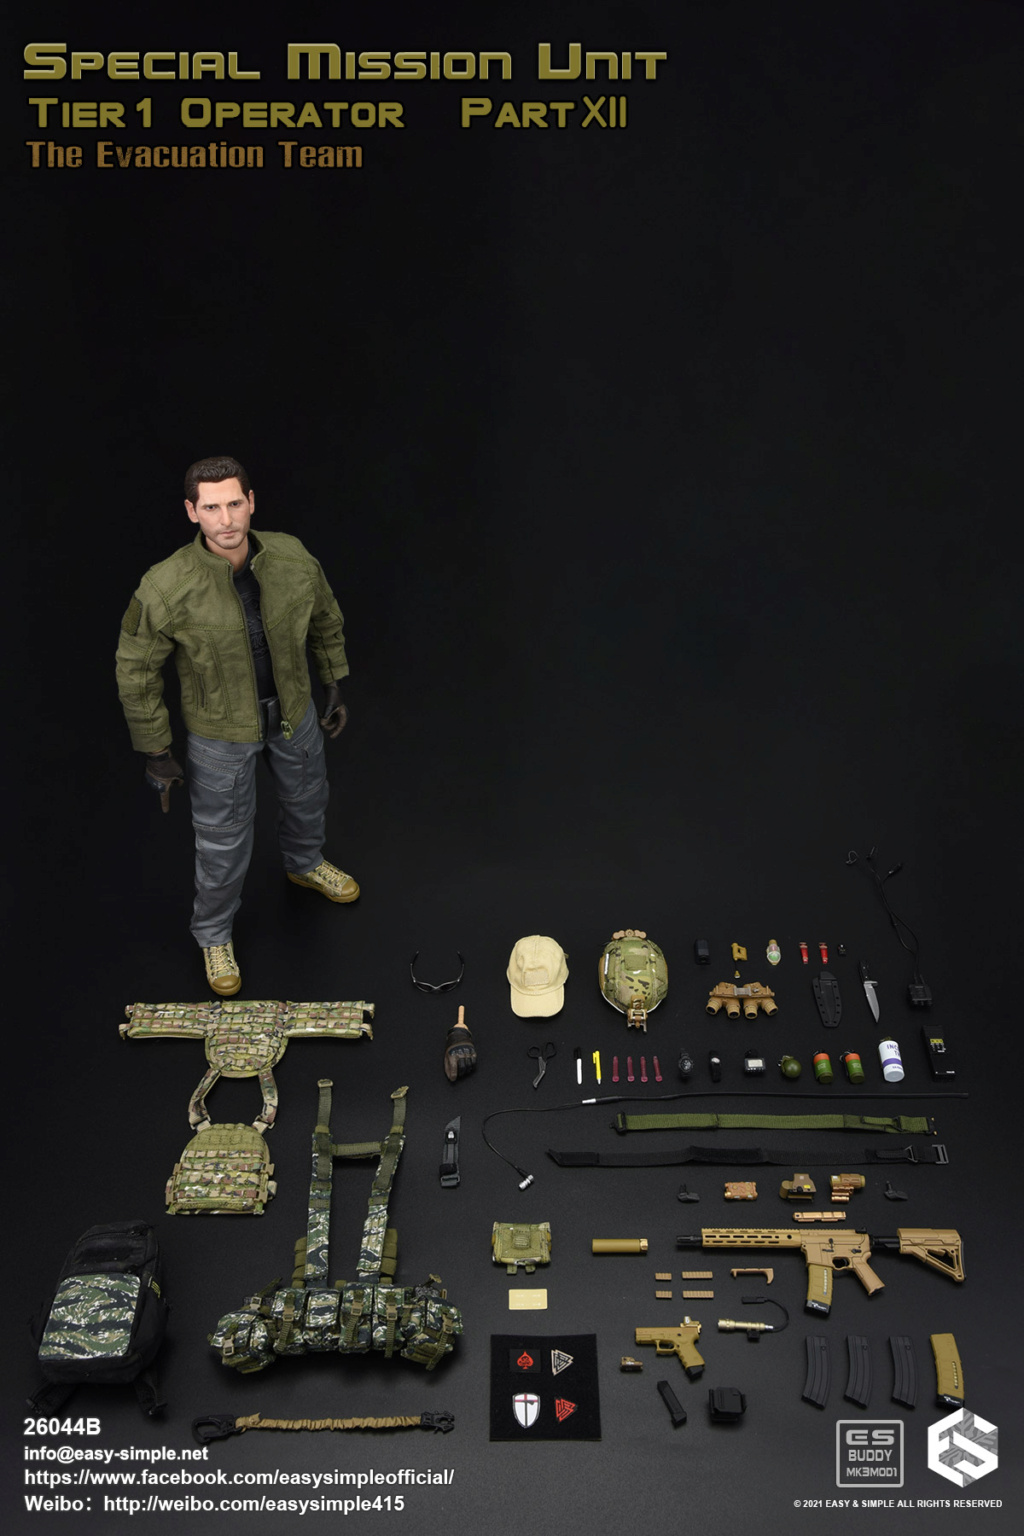 Tier1Operator - NEW PRODUCT: Easy&Simple: 26044B Special Mission Unit Tier1 Operator Part XII The Evacuation Team 83ca3110